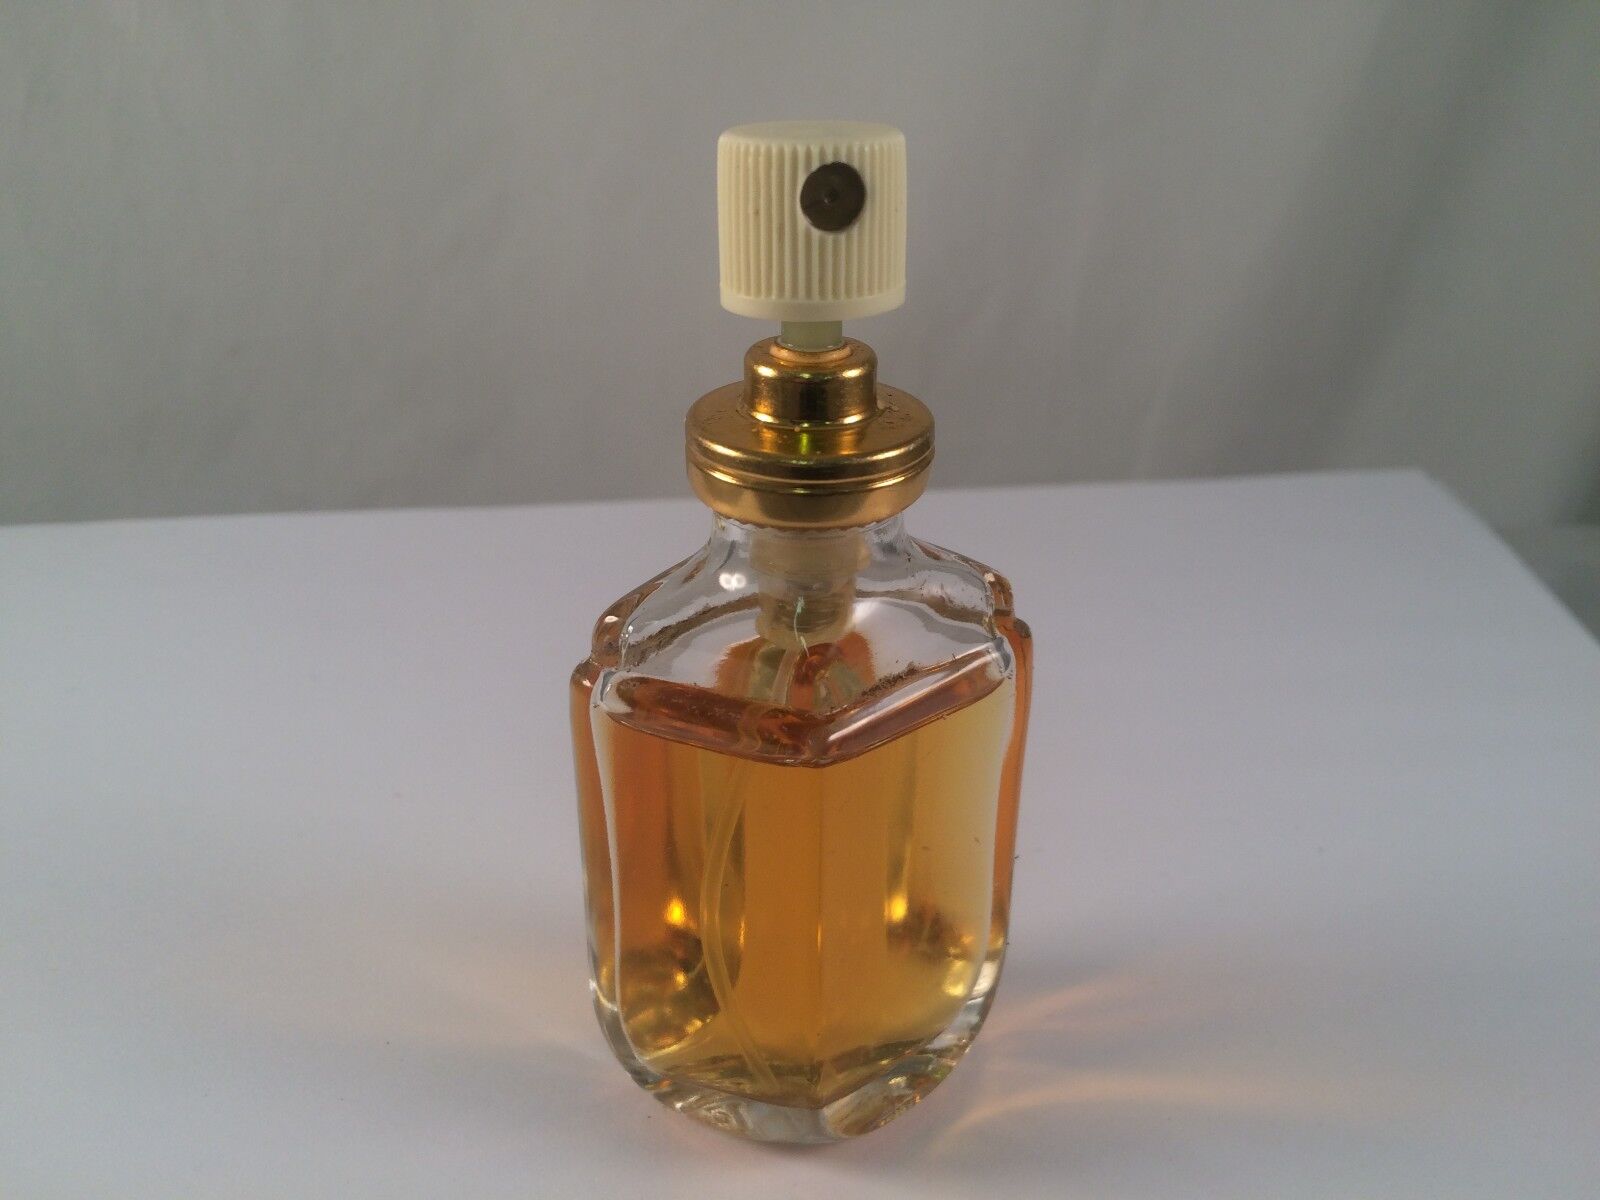 Enjoli by Charles of the Ritz 8 Hour Natural Spray Cologne .6 oz Perfume (C17)